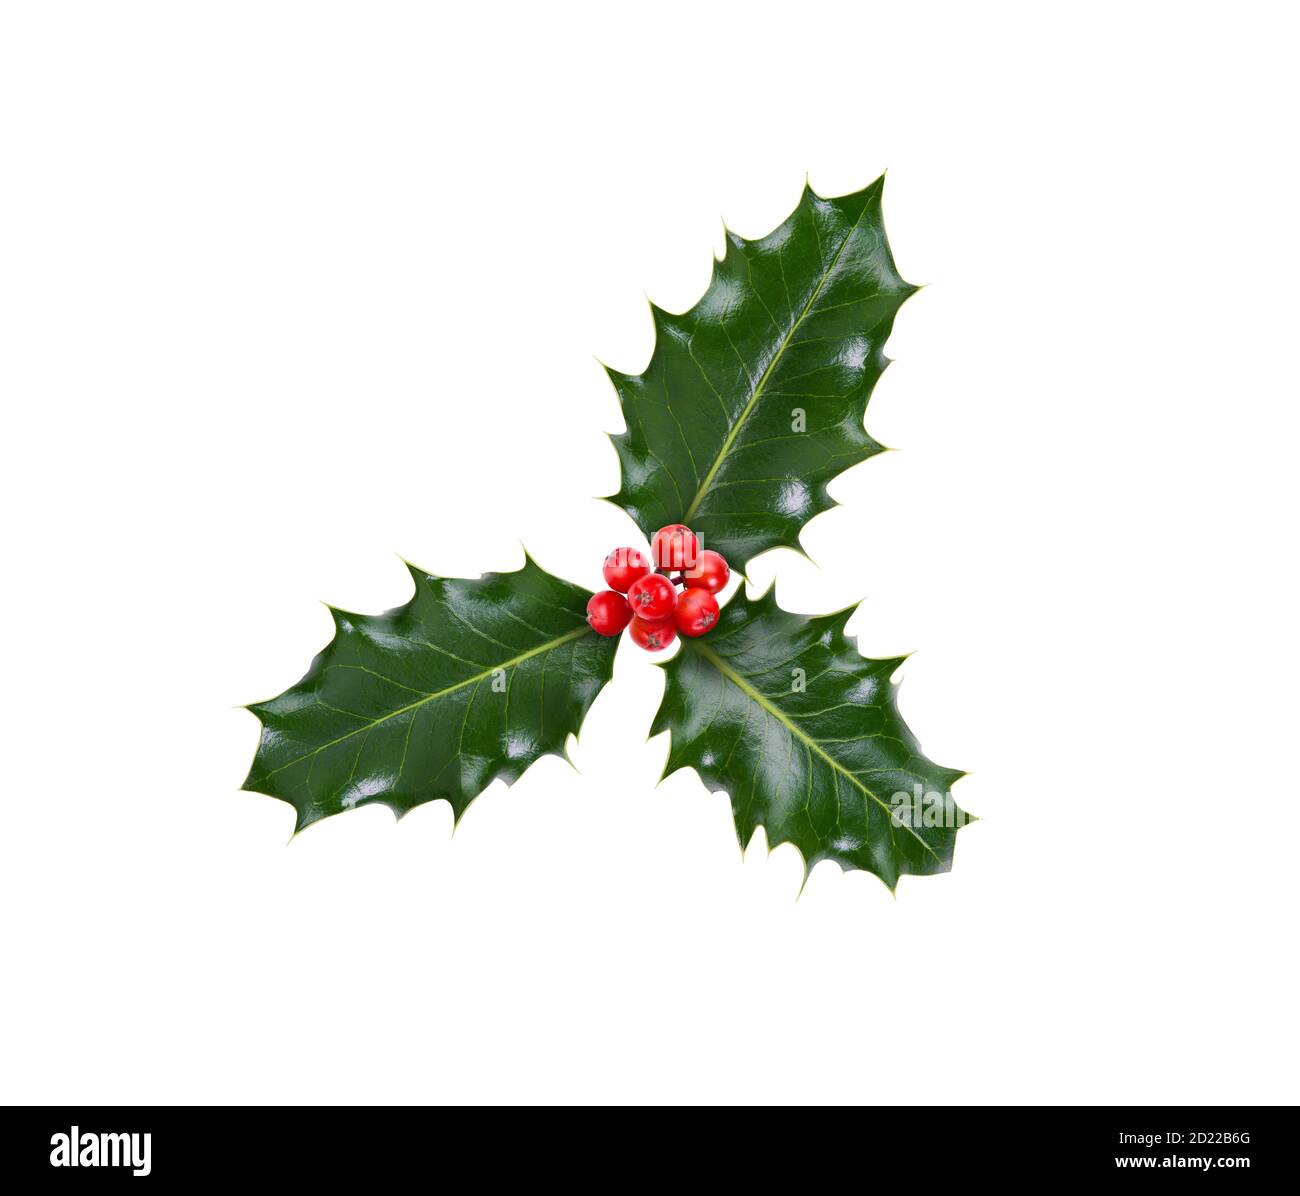 A sprig, three leaves, of green holly and red berries for Christmas decoration isolated against a white background. Stock Photo